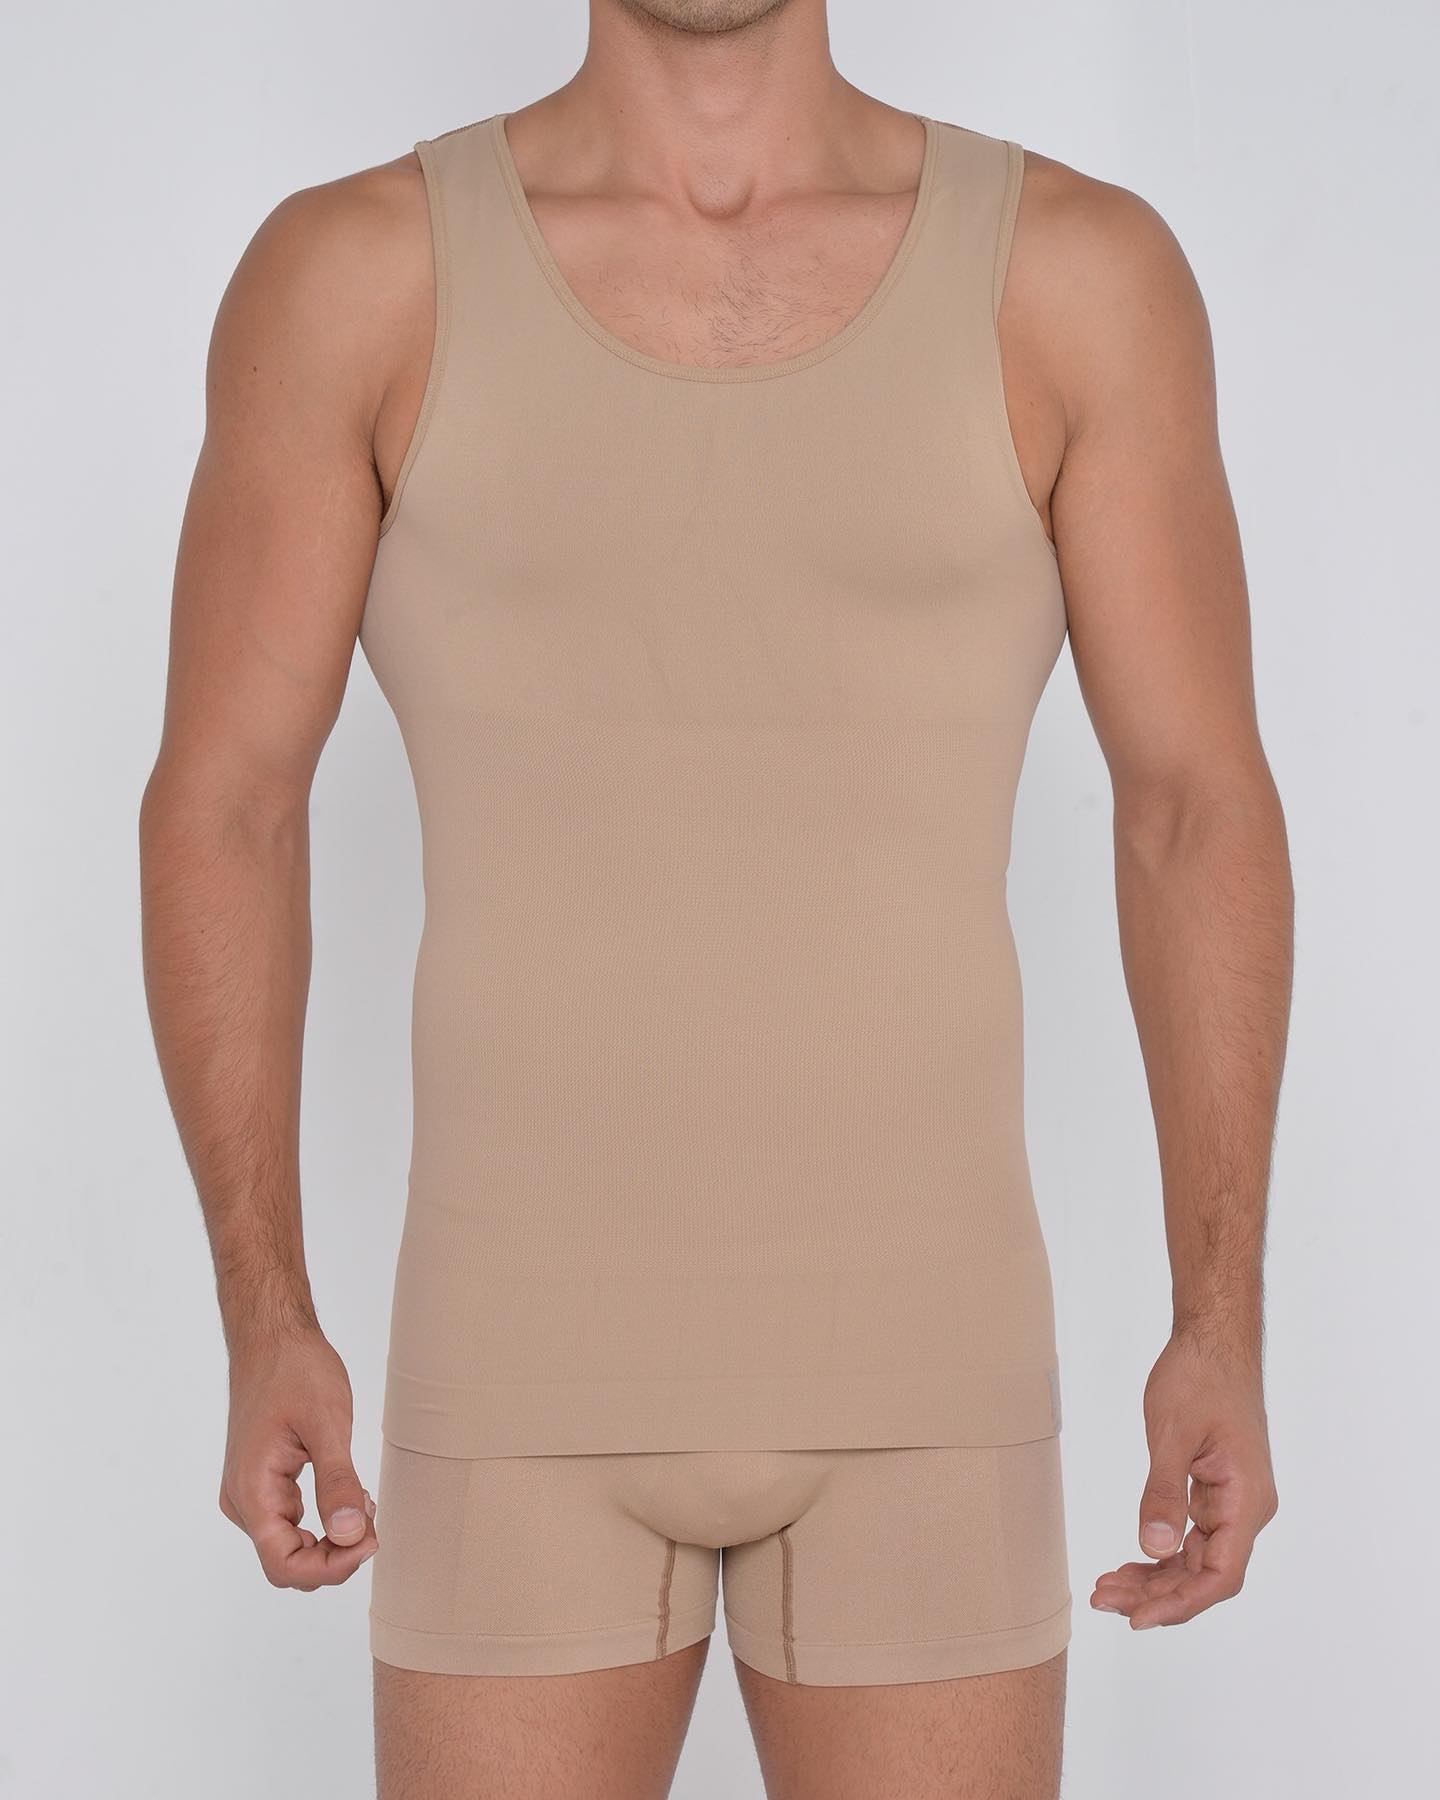 One of their most popular collections of AdamSmithWear is the Shapewear collection, which includes tank tops and trunks designed to help conceal a few inches around the waist. The Shaper Tanktops and Boxers in beige are now back in stock:
______
menandunderwear.com/shop